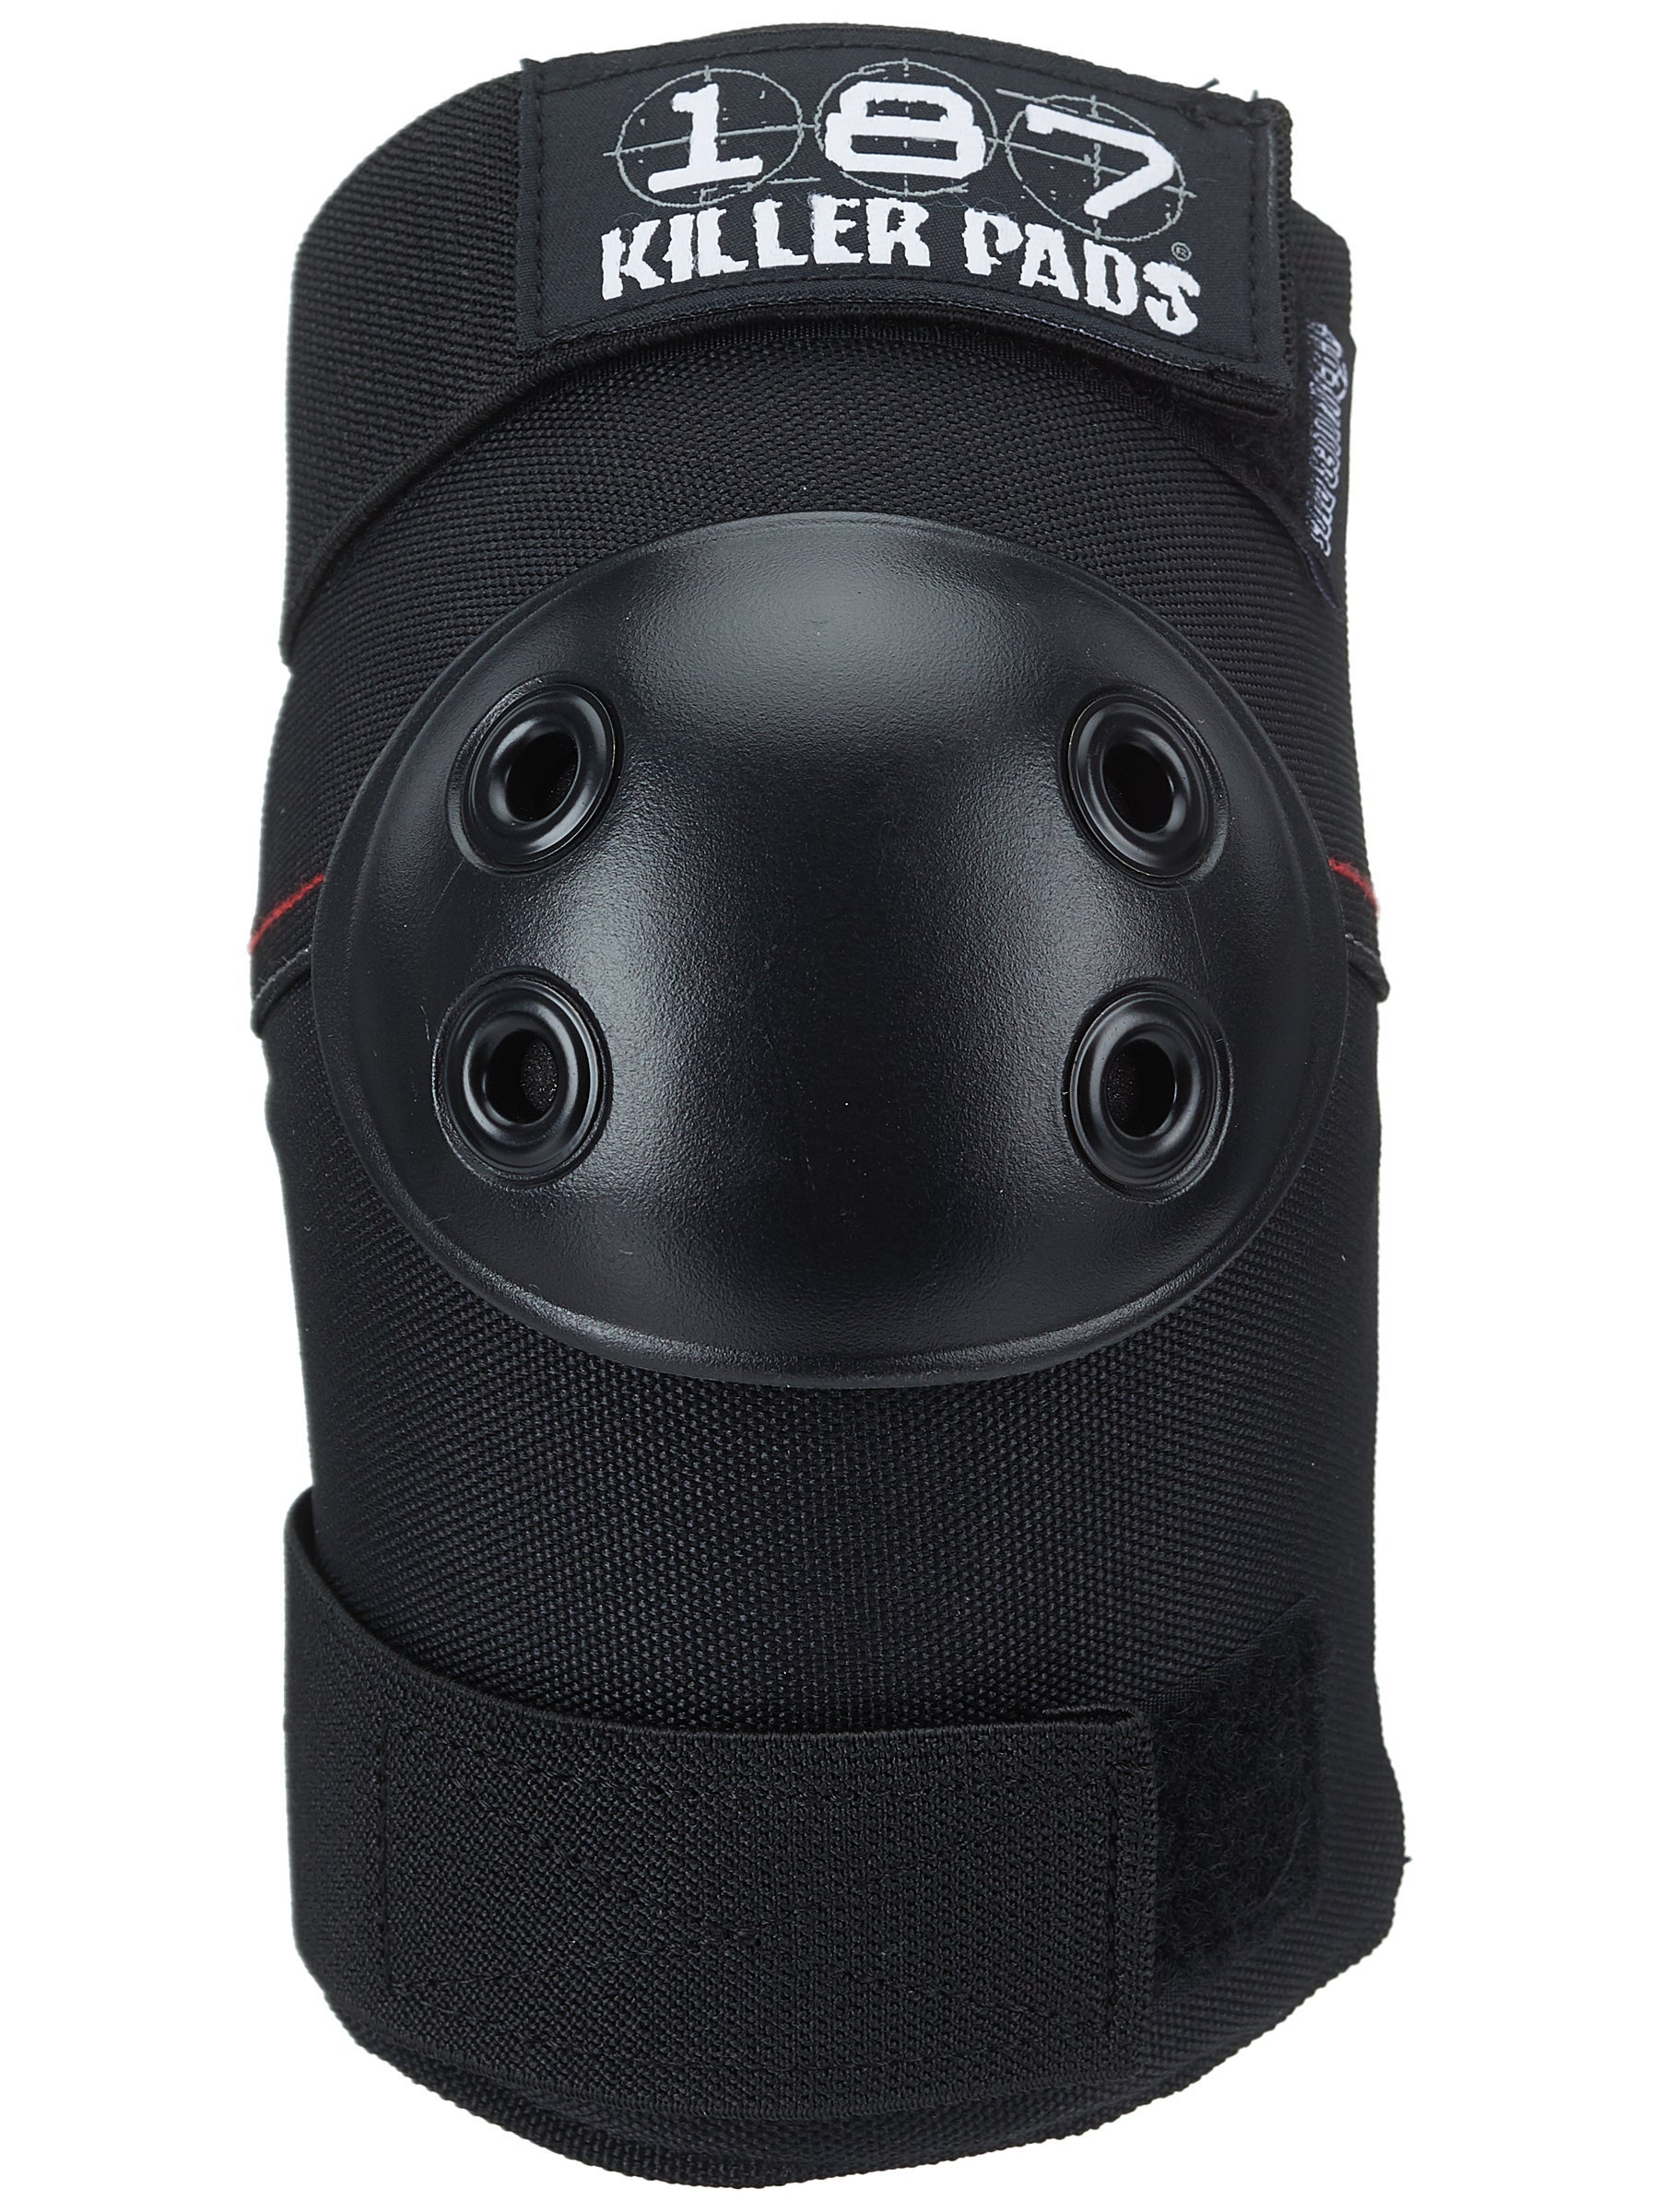 Details about   187 Killer Pads Skate-and-Skateboarding-Elbow-Pads Pro Elbow Pad 